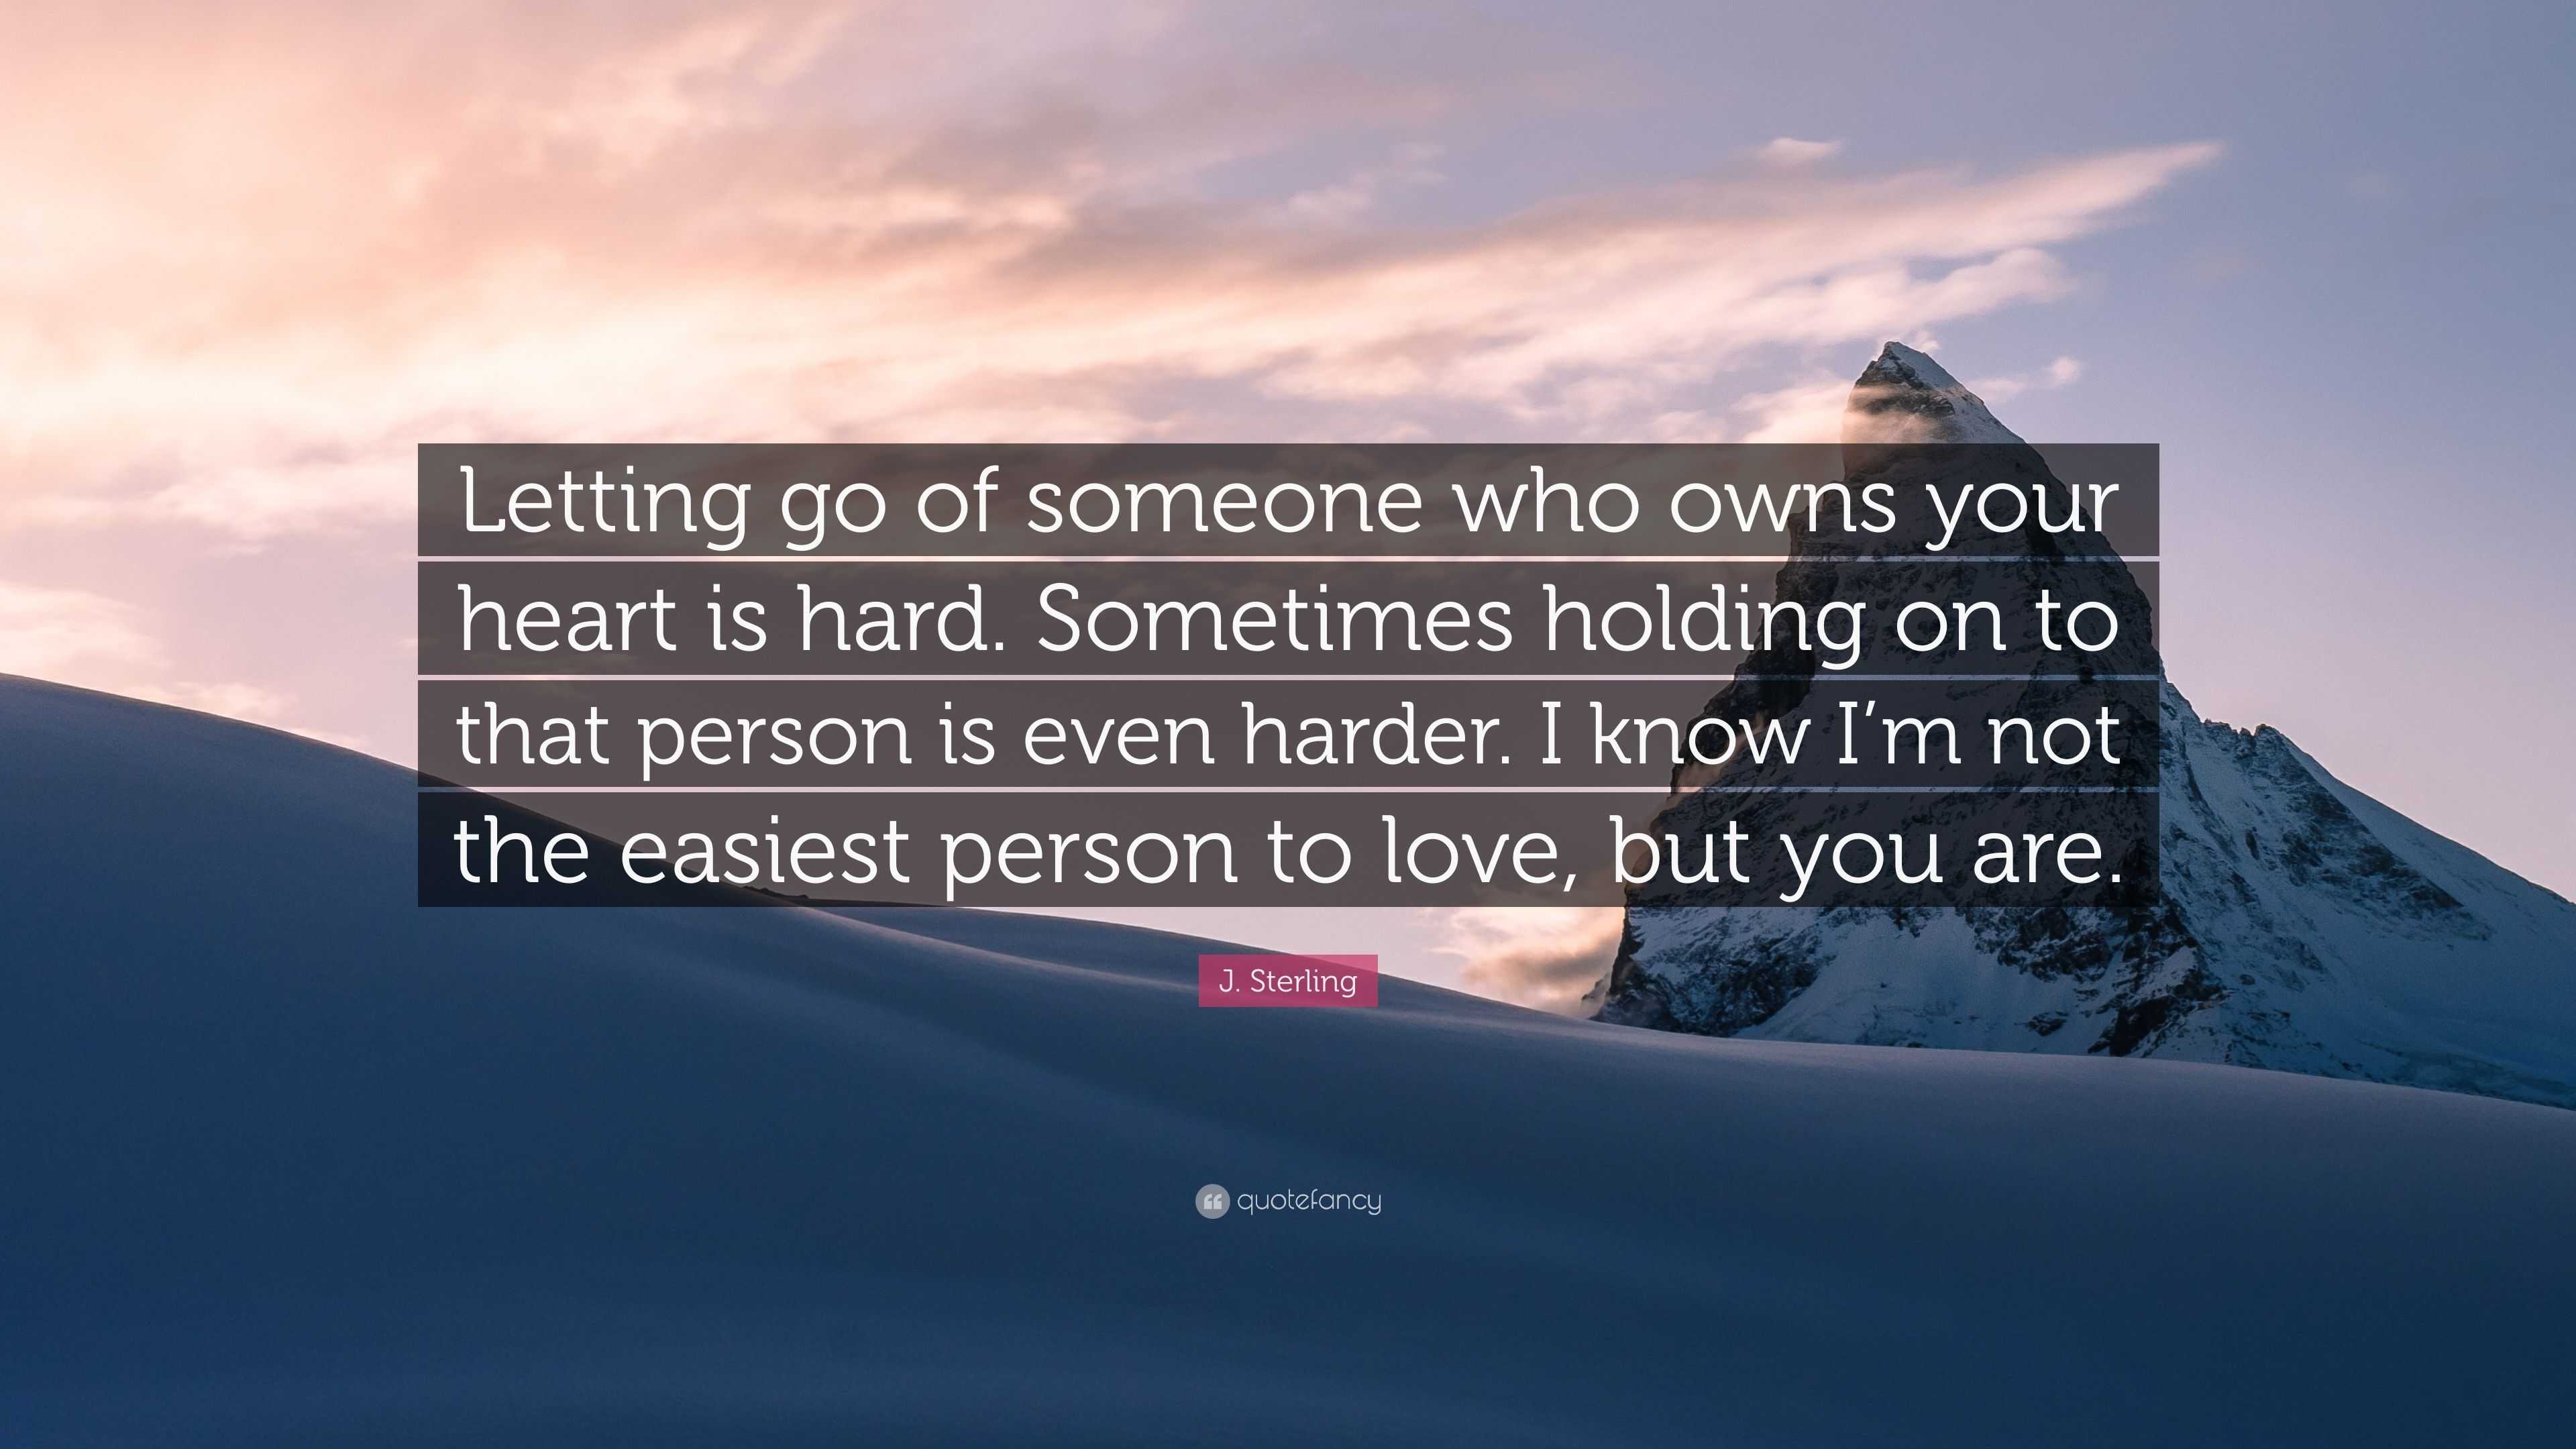 J Sterling Quote “Letting go of someone who owns your heart is hard